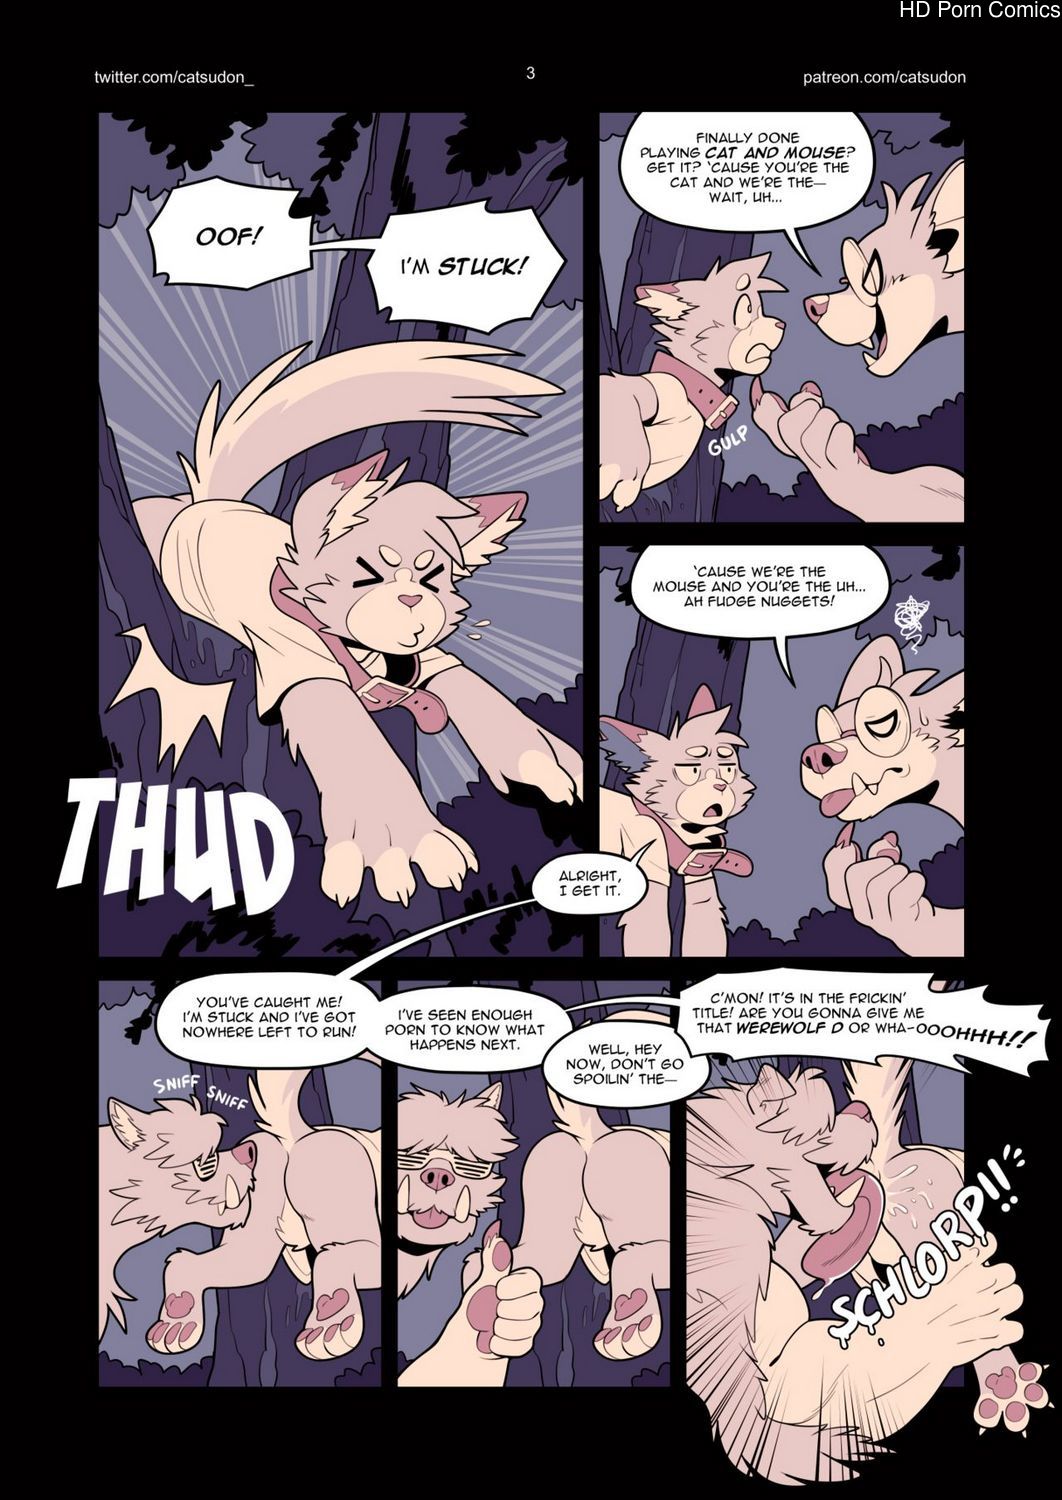 Furries Gangbang Porn - Catsudon Gets Gangbanged In The Woods By Werewolves Who Are Also A Bunch Of  Dorks comic porn - HD Porn Comics